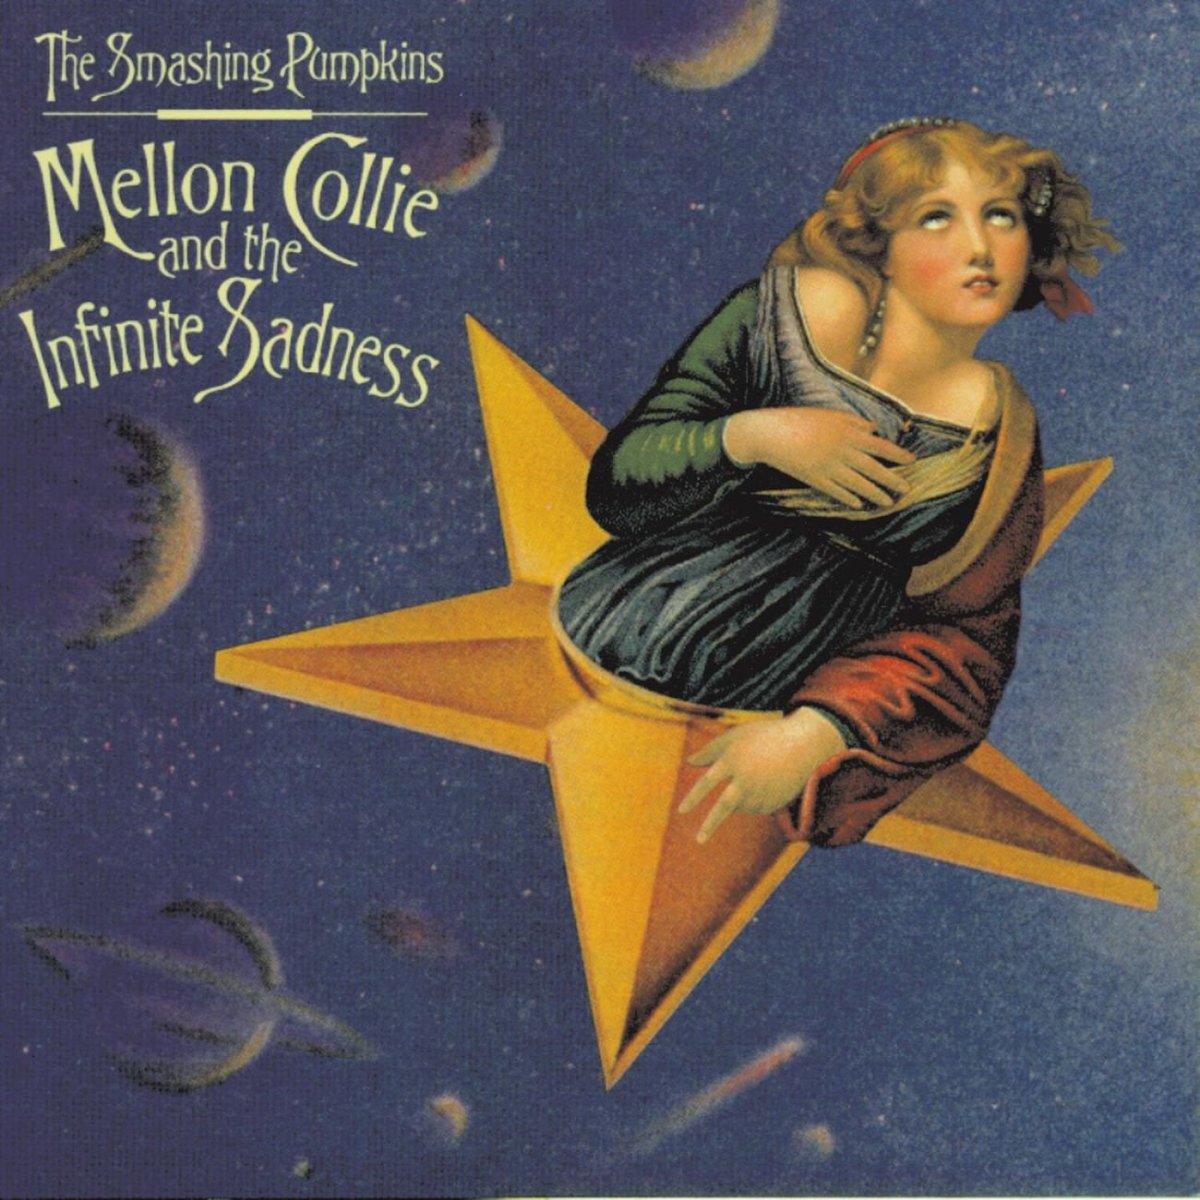 review-of-the-album-mellon-collie-and-the-infinite-sadness-by-the-smashing-pumpkins